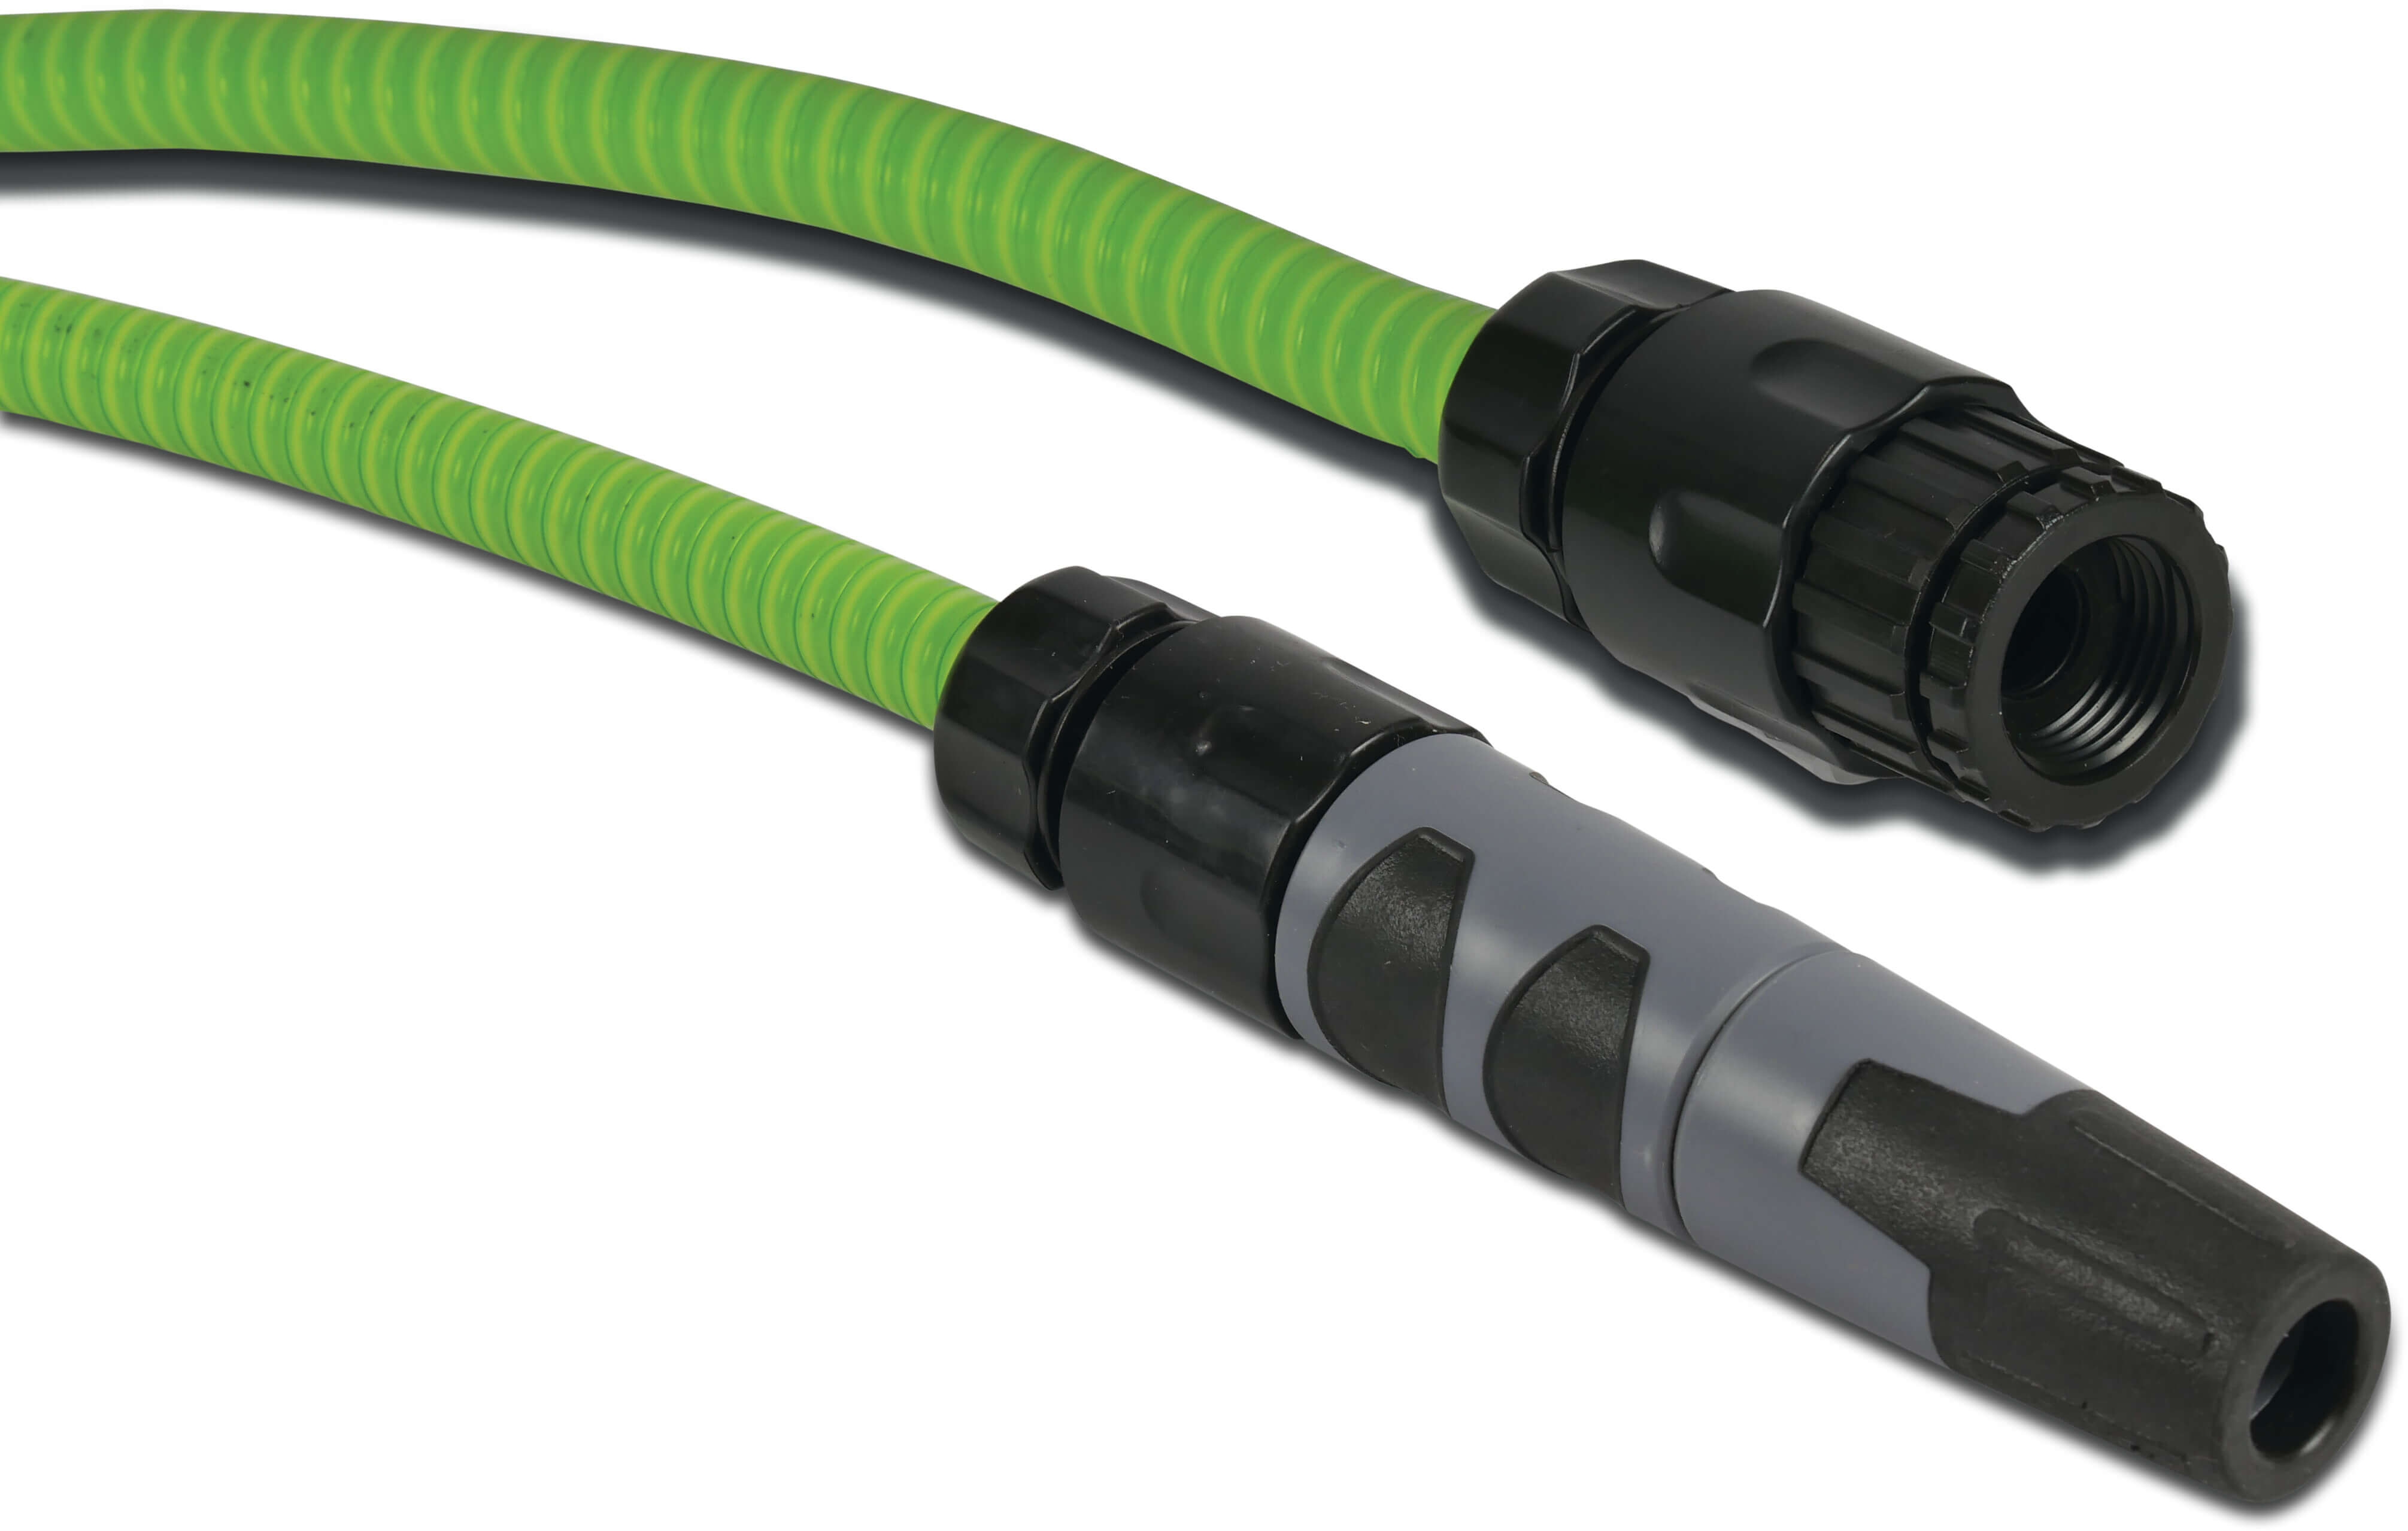 Flotide Garden spiral hose kit PVC 12 mm 7bar green 25m type Joyflex with couplings and nozzle